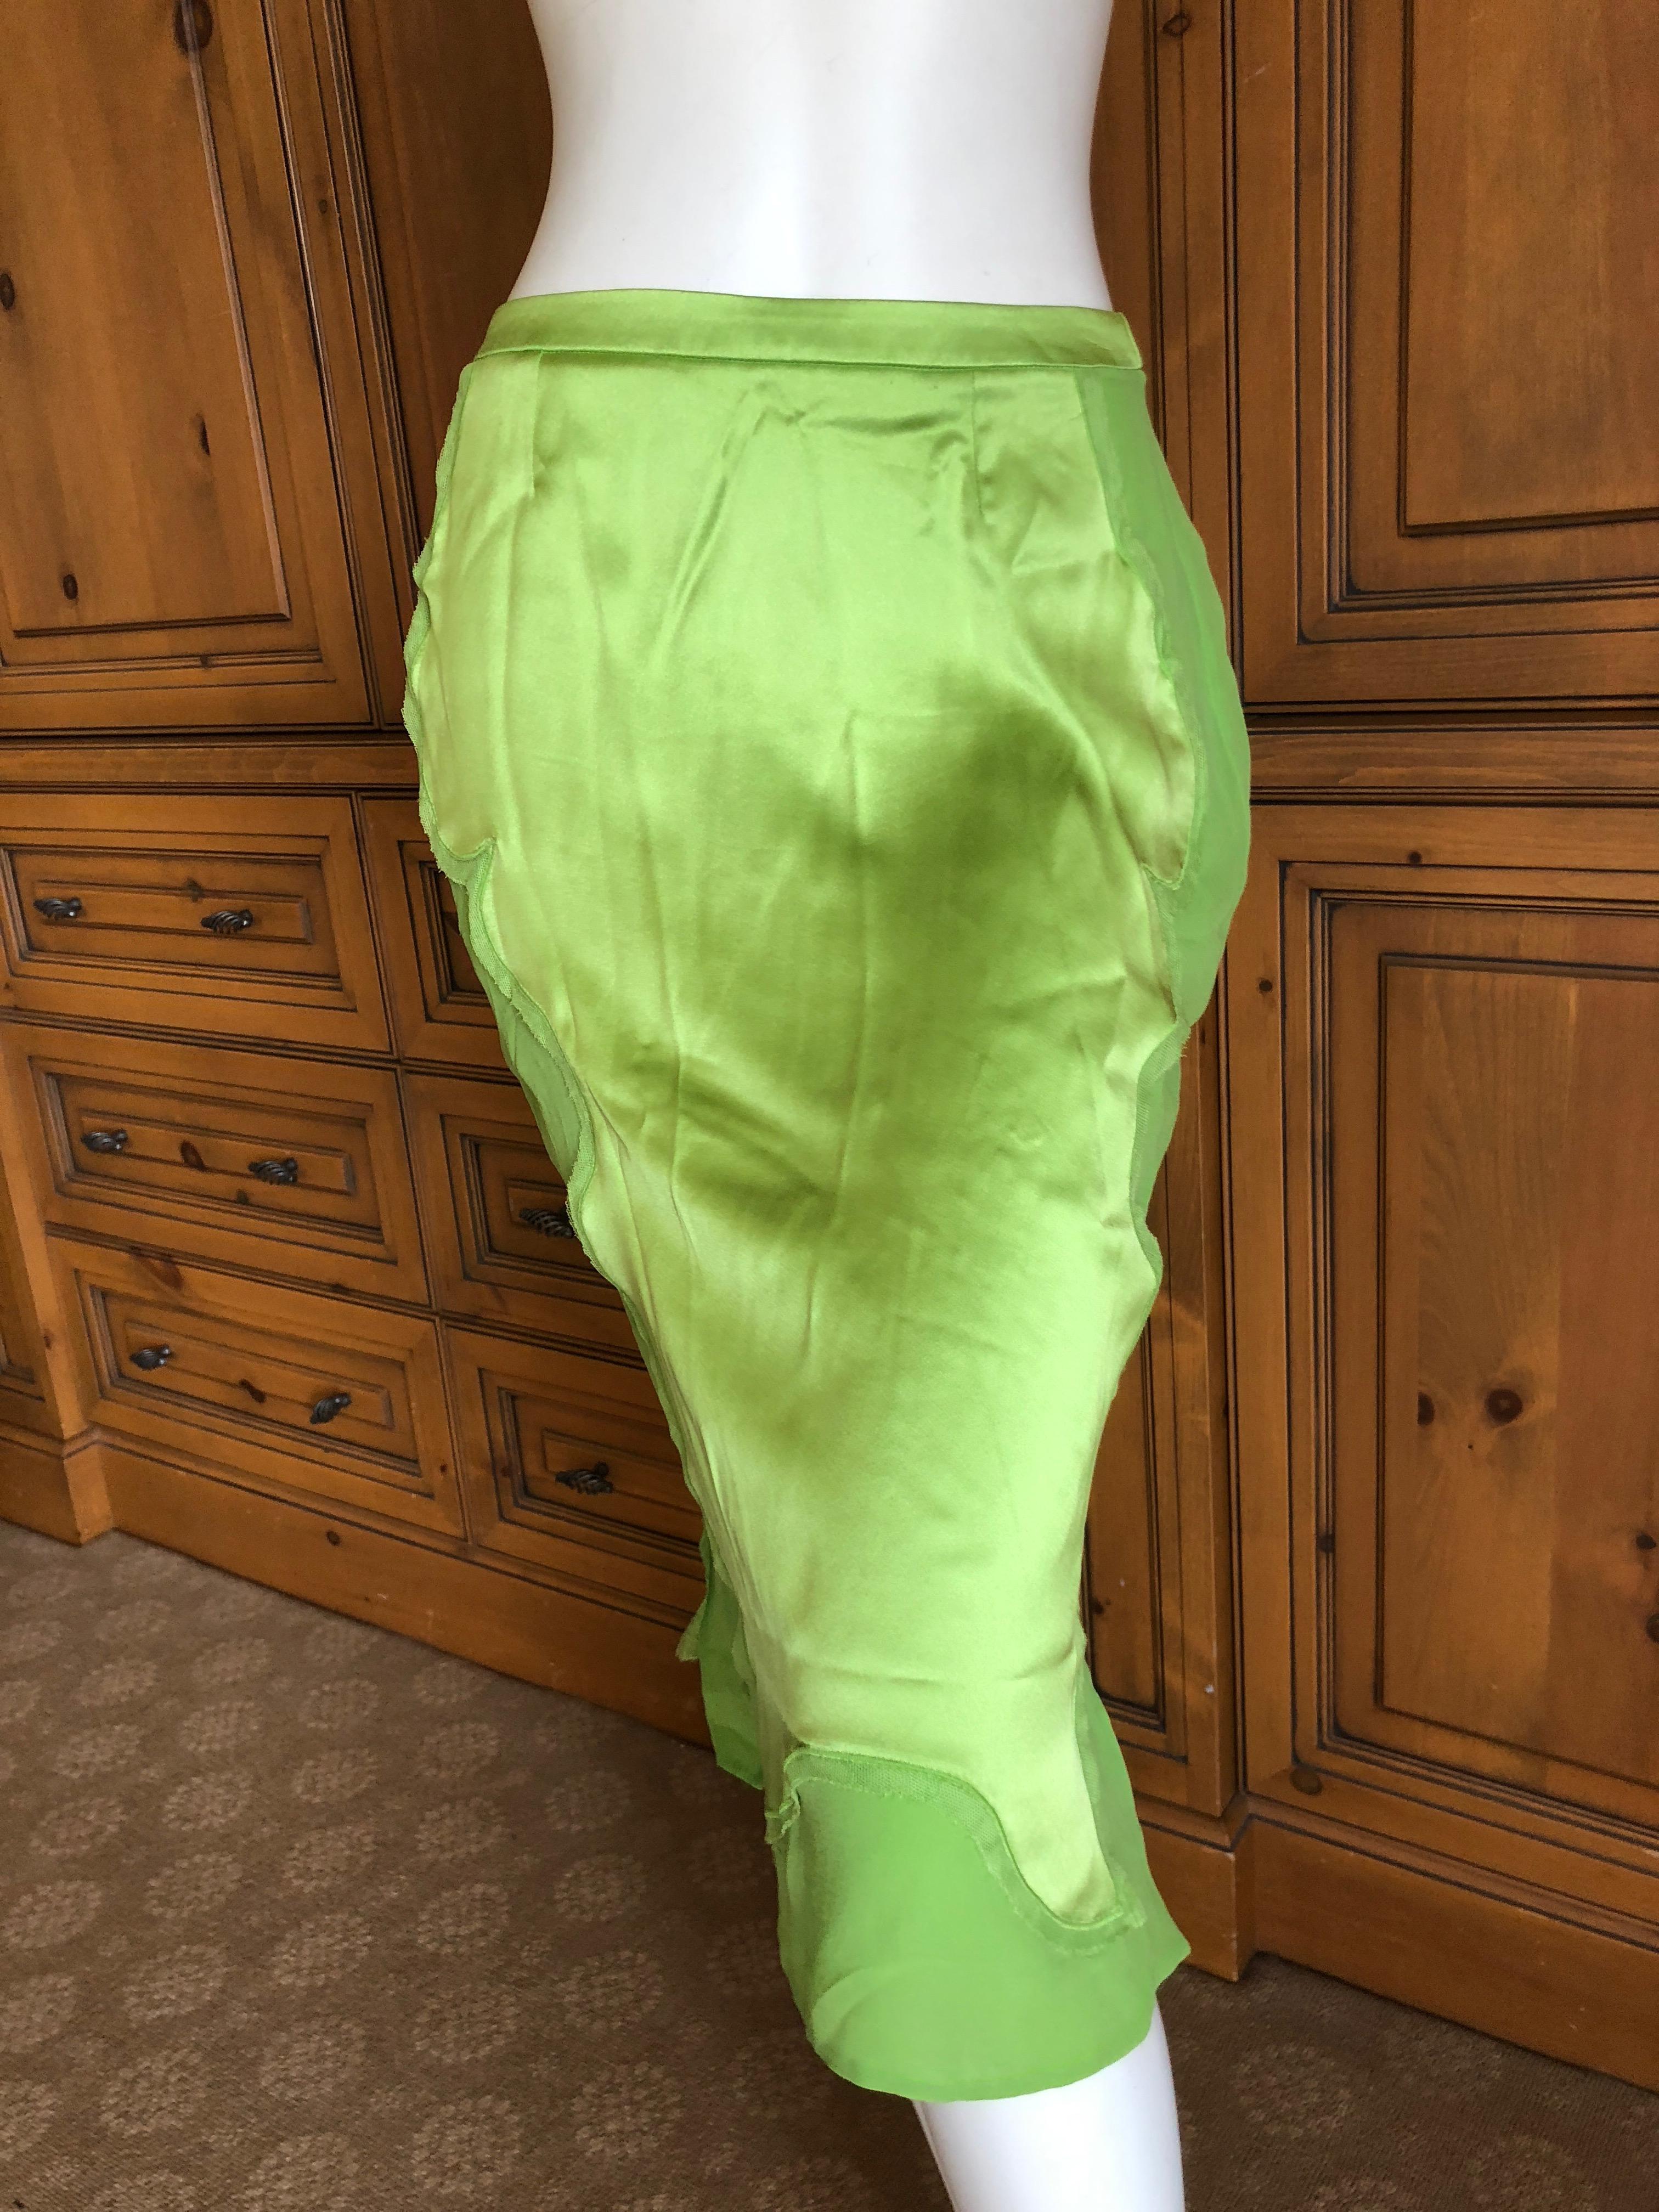 Yves Saint Laurent by Tom Ford 2004 Bright Green Silk Skirt New with Tags Sz 38 In New Condition For Sale In Cloverdale, CA